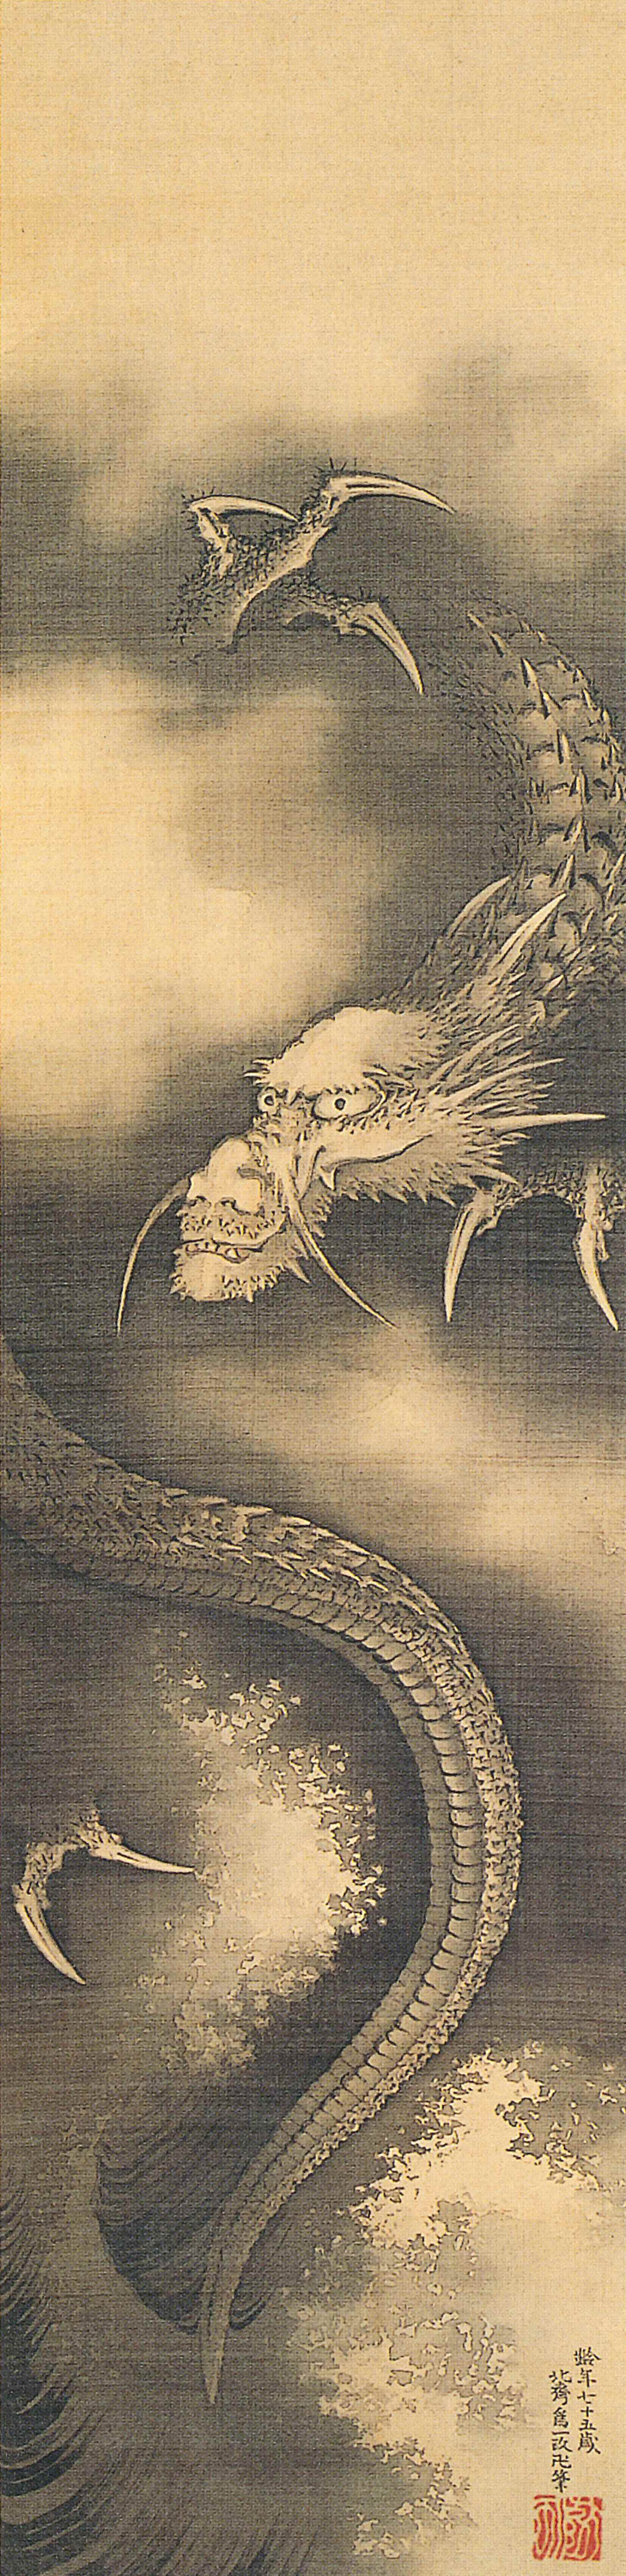 <p><strong>Katsushika Hokusai</strong>, <em>Dragon and Clouds</em>, 1834, Private Collection.</p>
